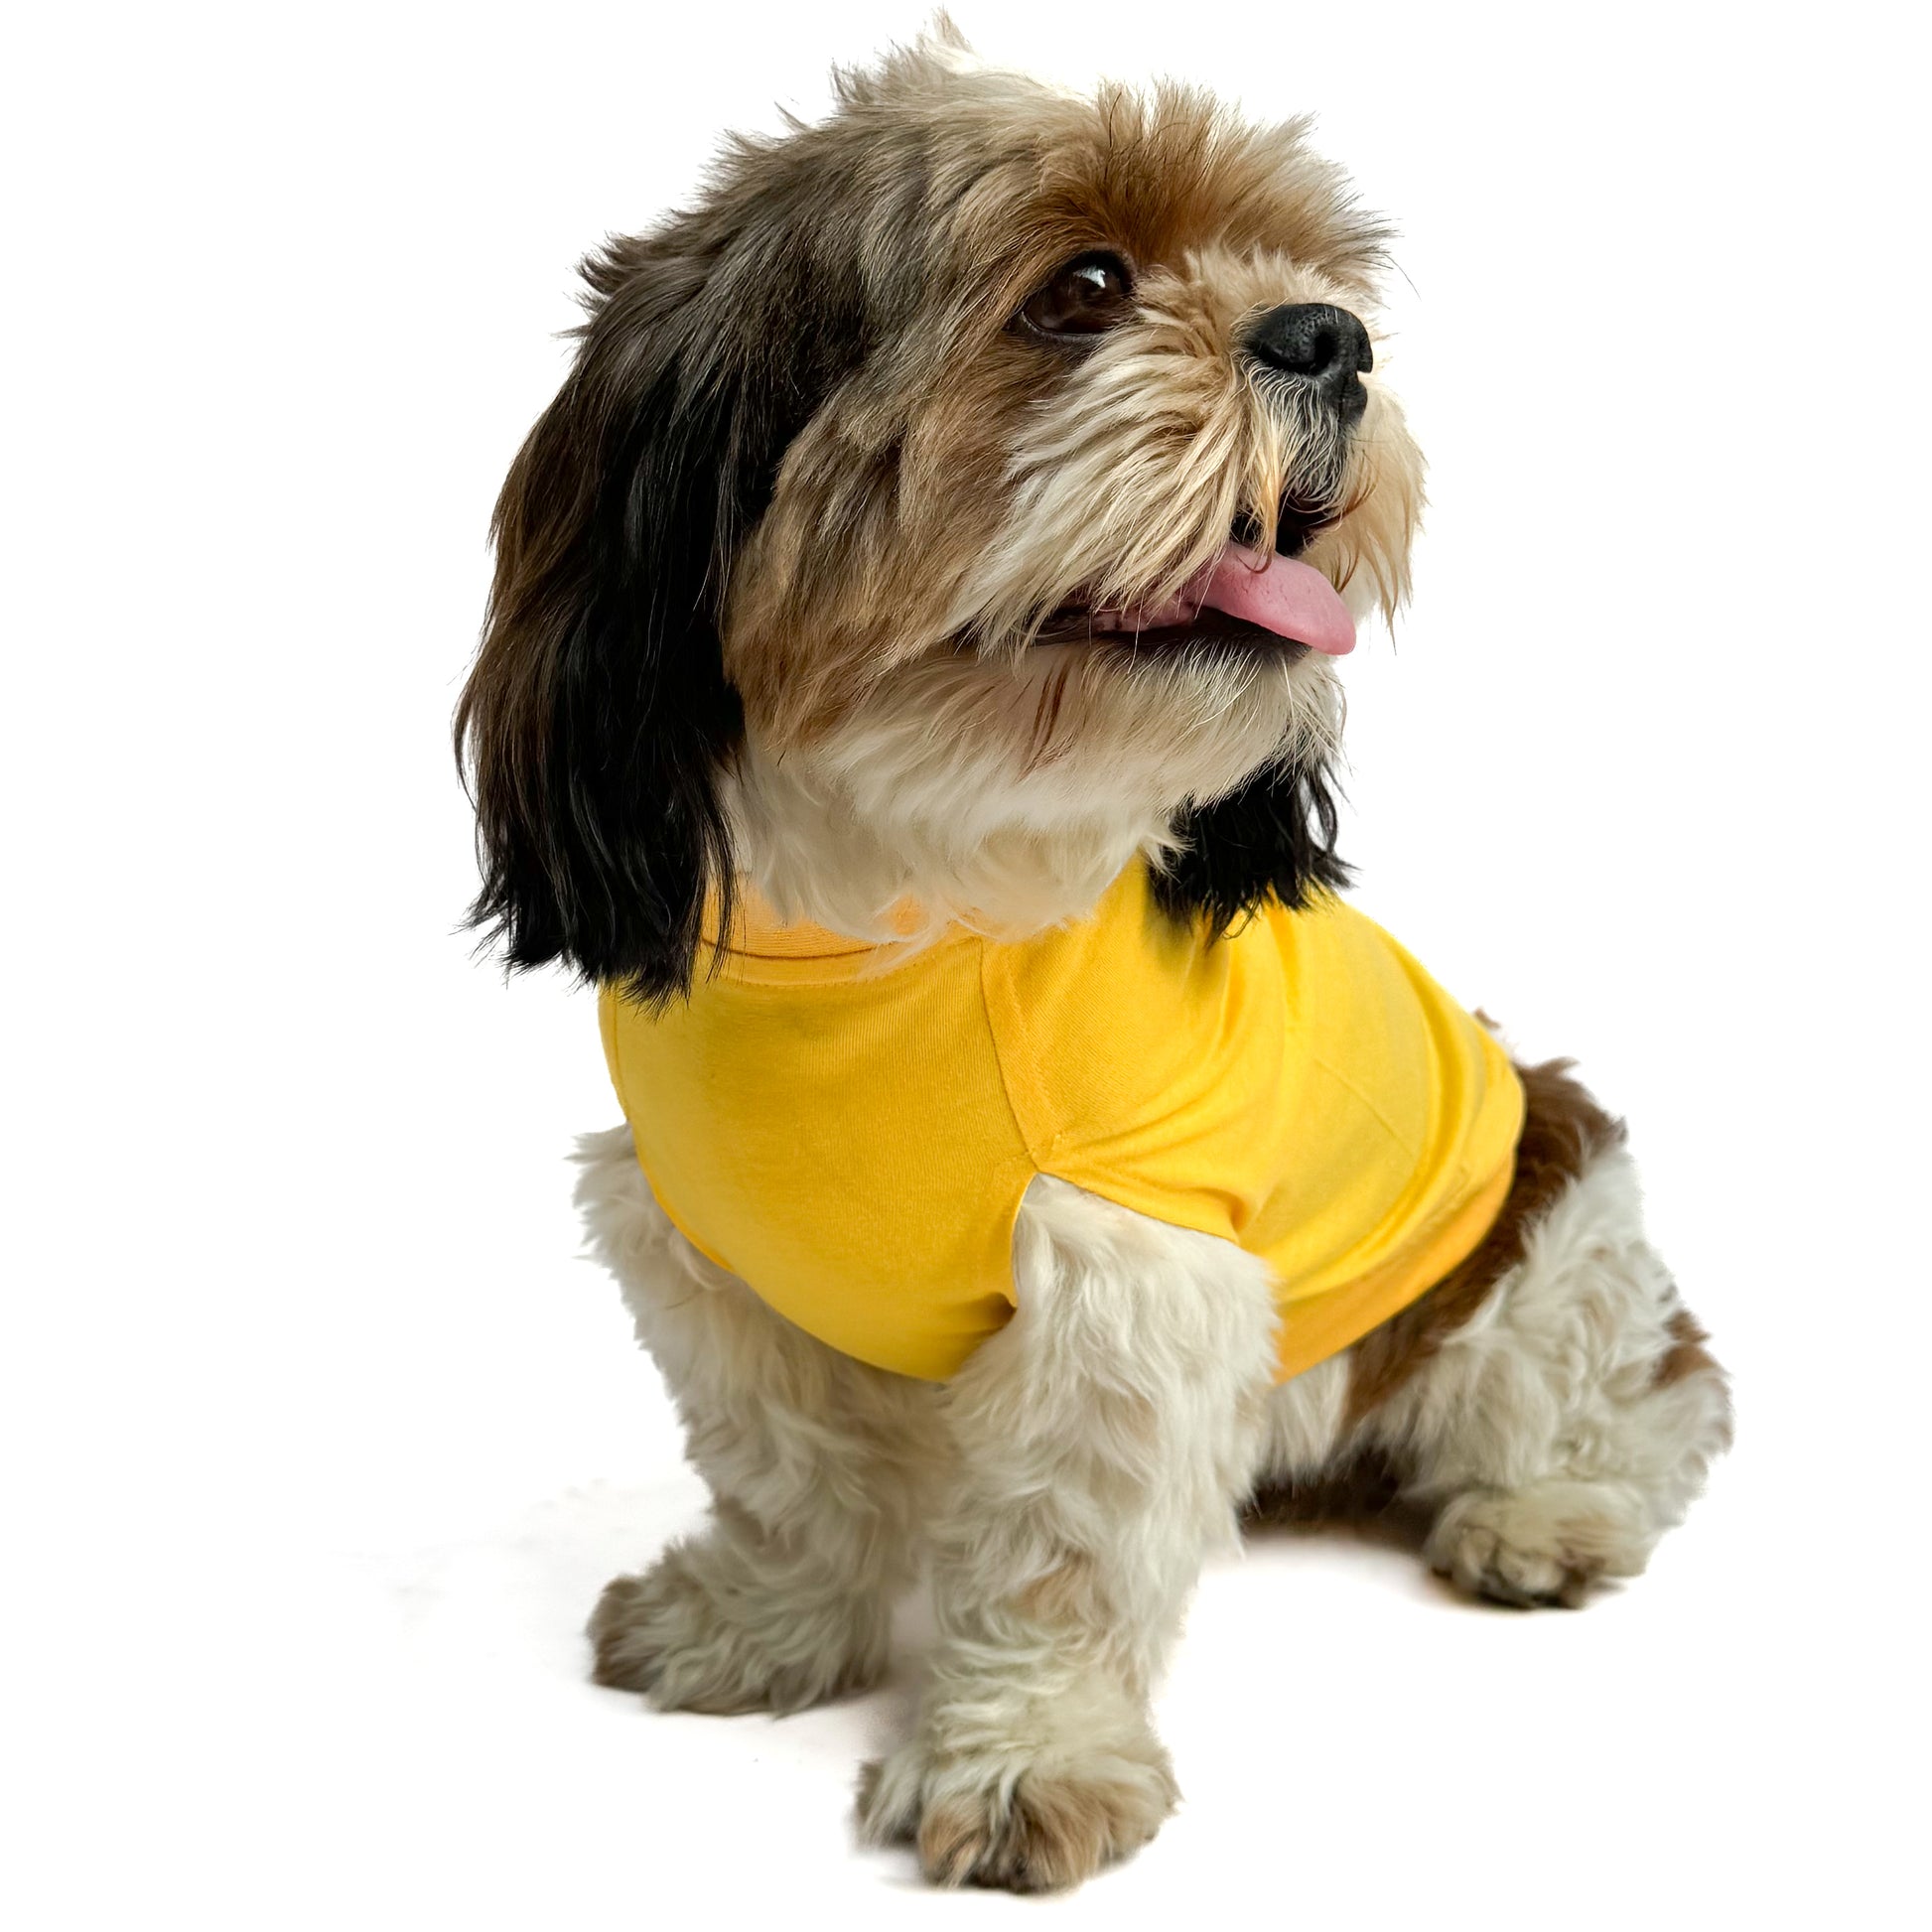 Pawgy Pets T-shirt Lick Fetch Treat Repeat Yellow for Dogs & Cats